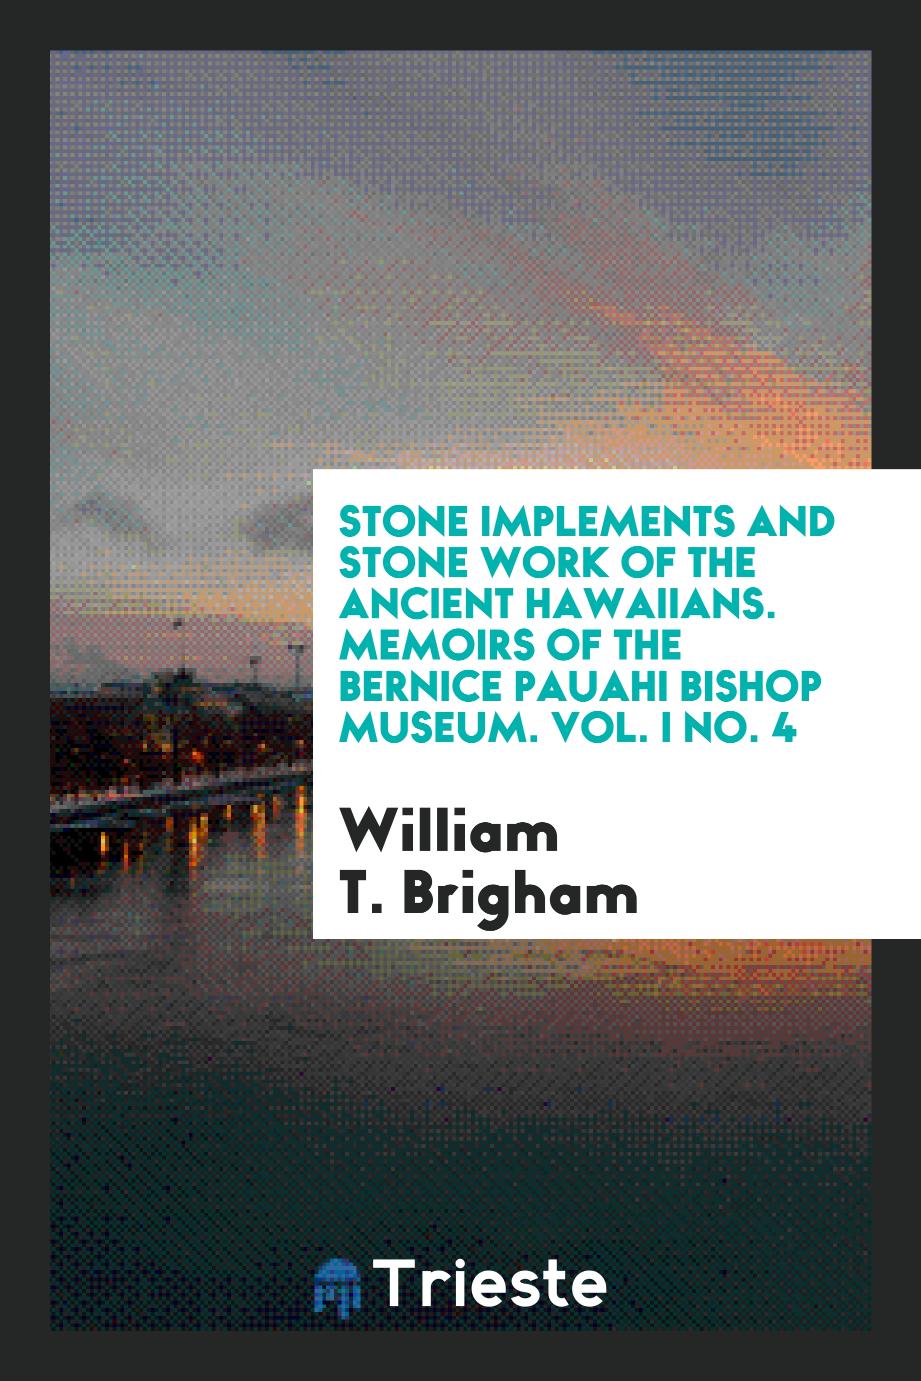 Stone Implements and Stone Work of the Ancient Hawaiians. Memoirs of the Bernice Pauahi Bishop Museum. Vol. I No. 4